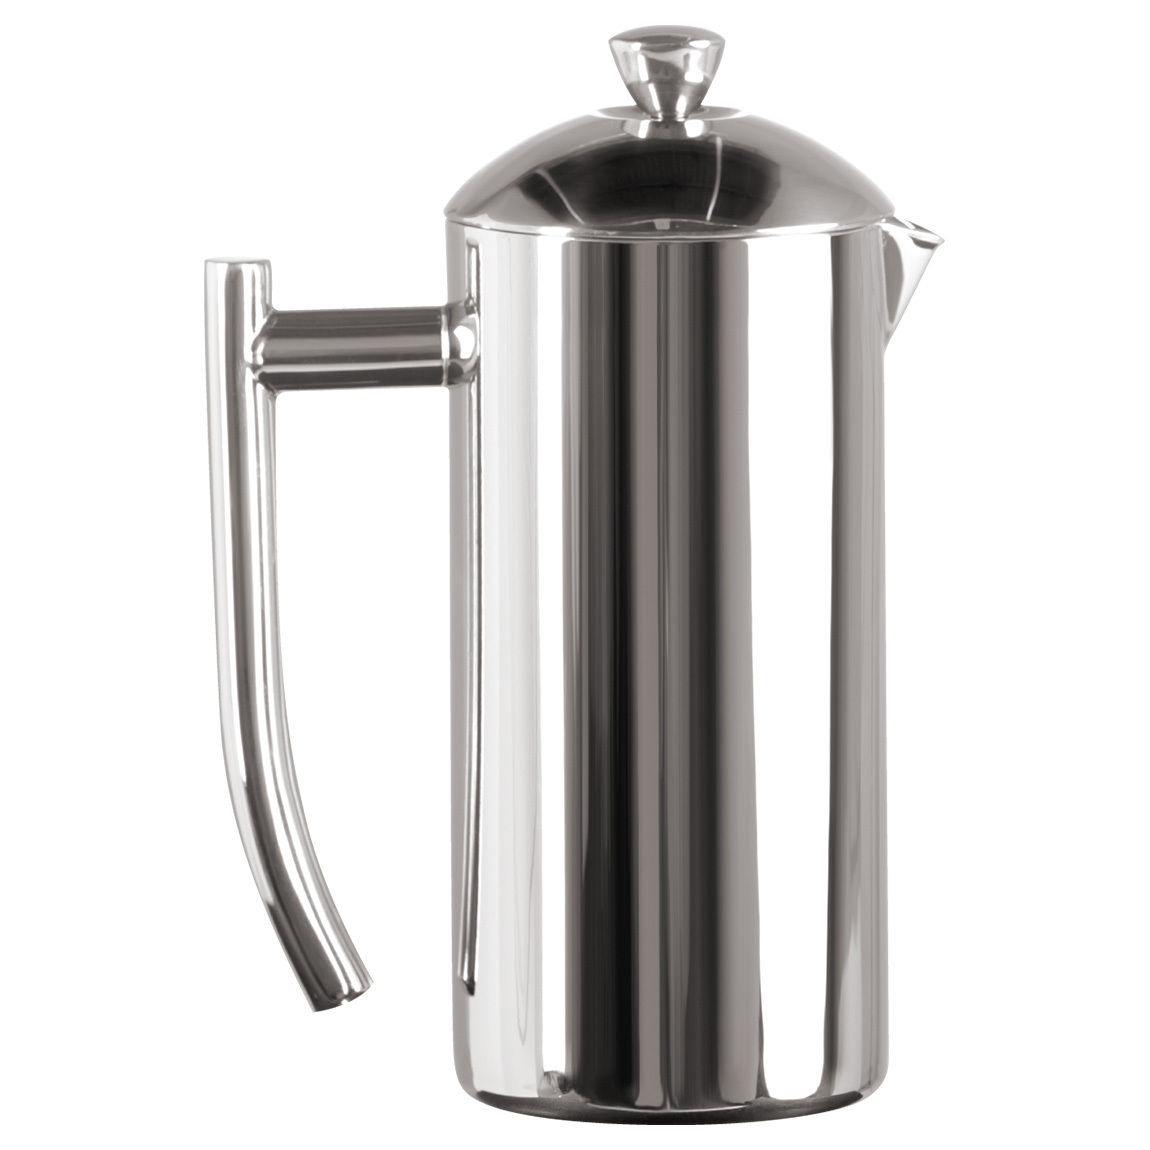 Frieling 17 oz Double Wall Stainless Steel French Press Frieling 17 Oz. Insulated Stainless Steel French Press